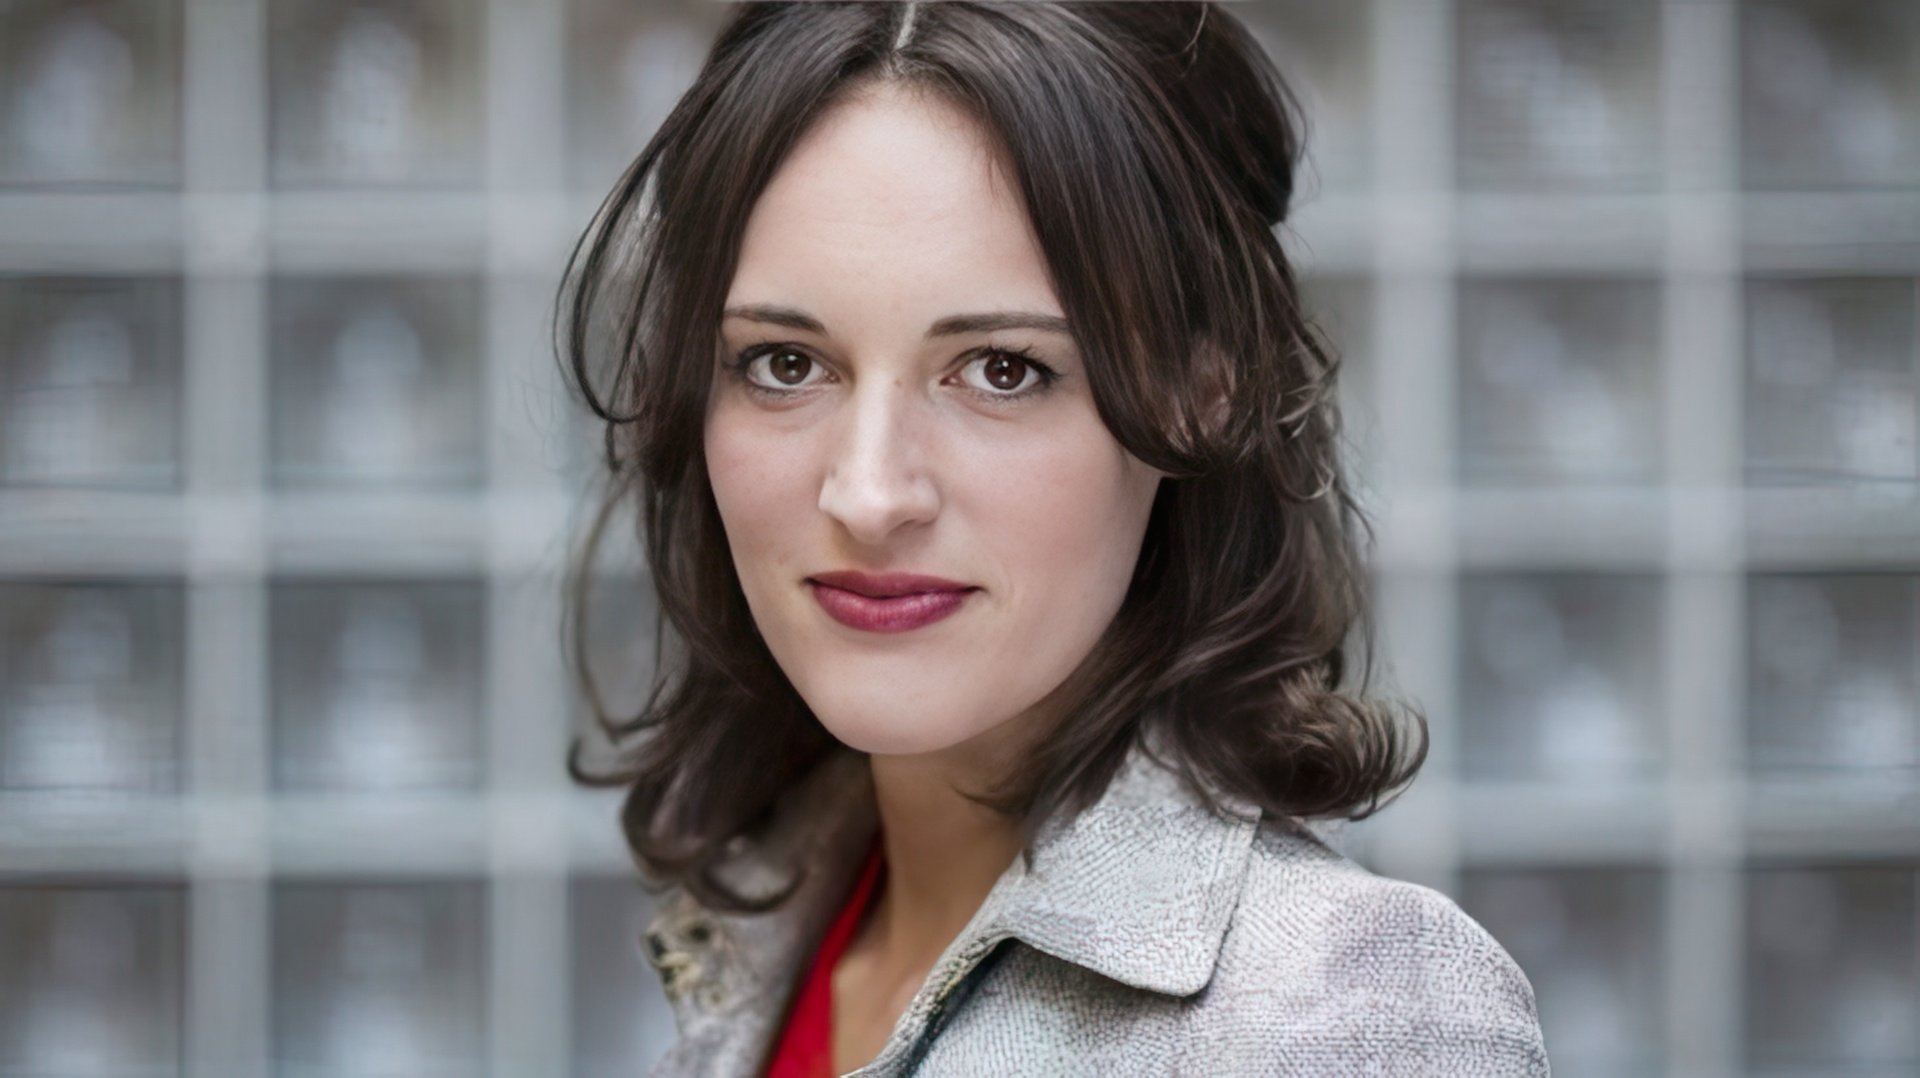 Phoebe Waller-Bridge graduated from the Royal Academy of Dramatic Art